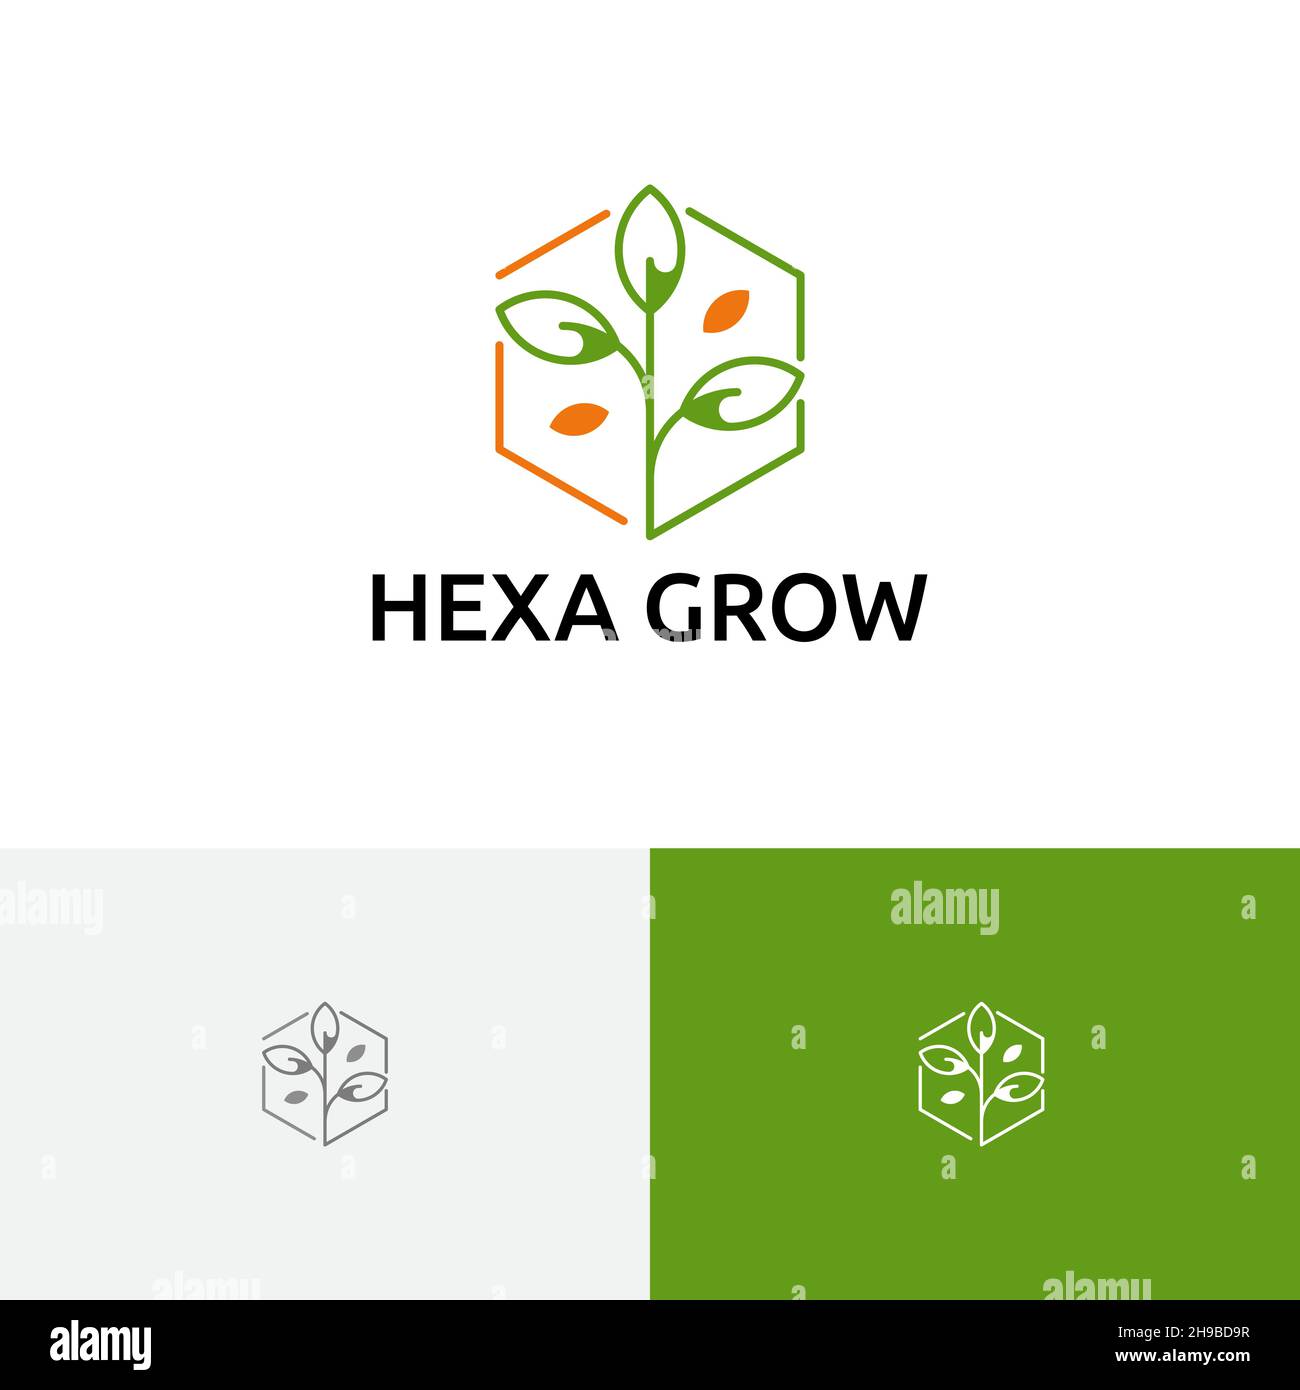 Hexagon Grow Plant Seed Nature Agriculture Logo Stock Vector